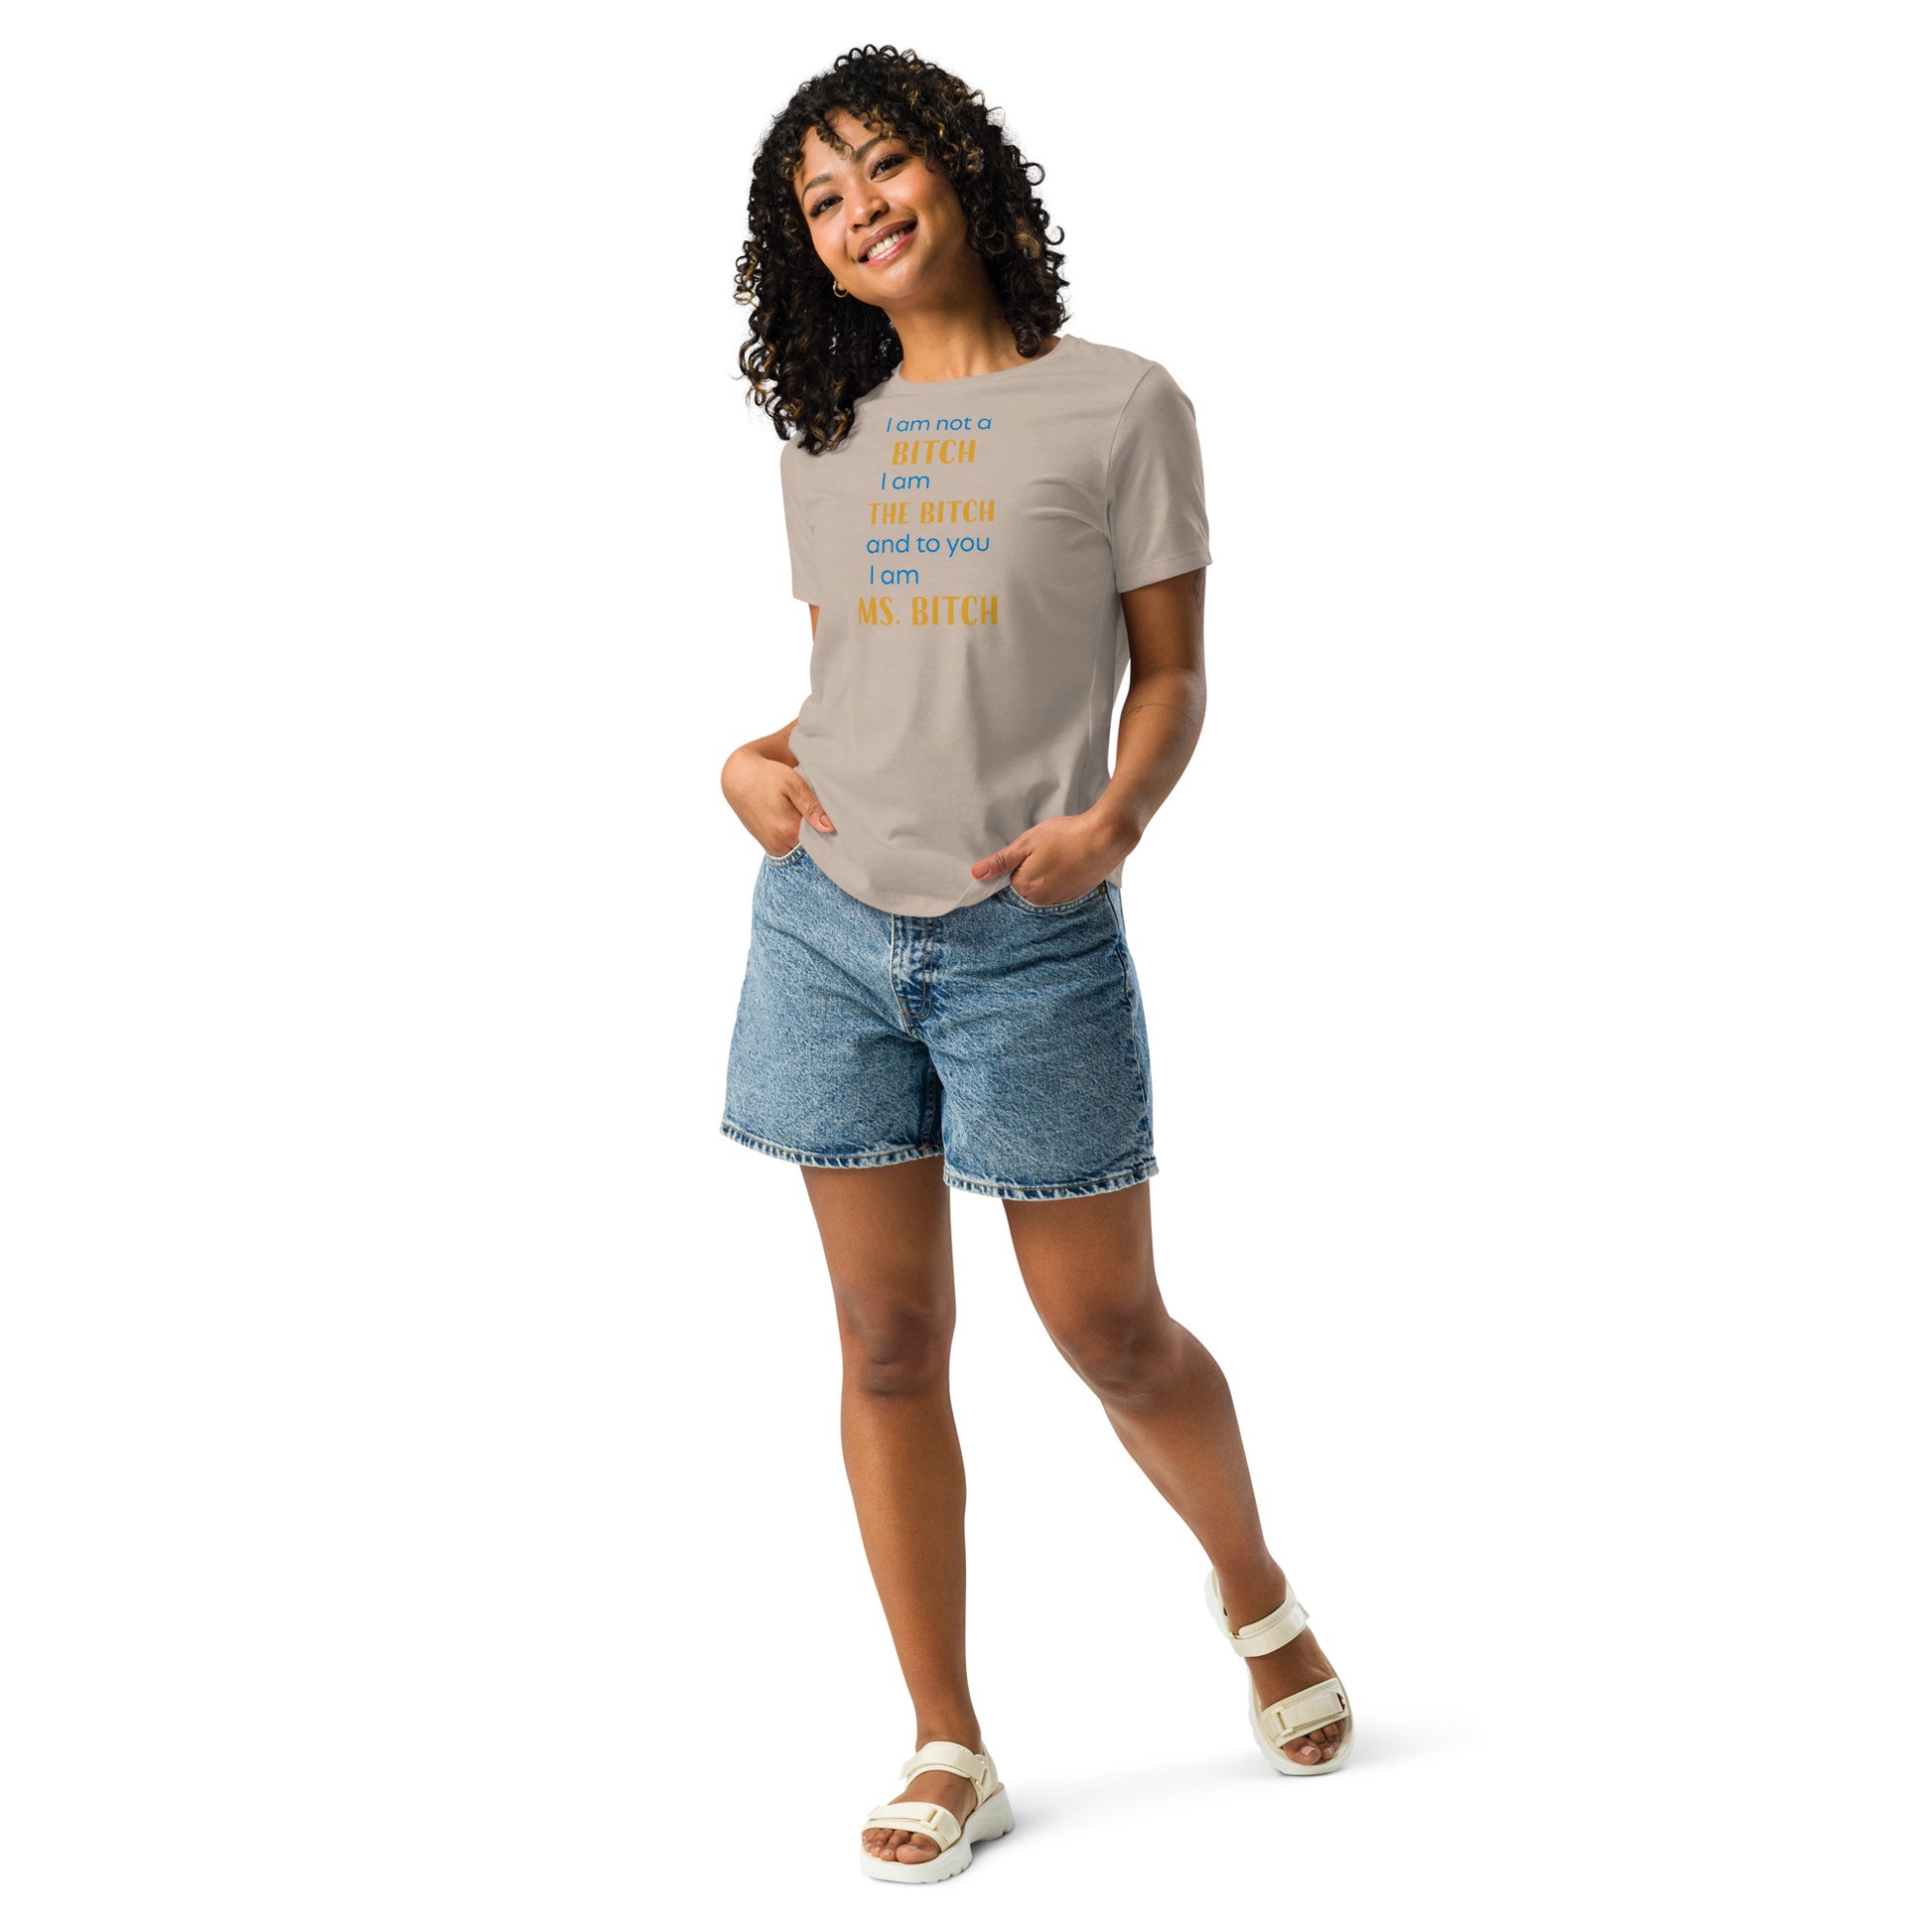 Women with stone t-shirt with the text "to you I'm MS bitch"